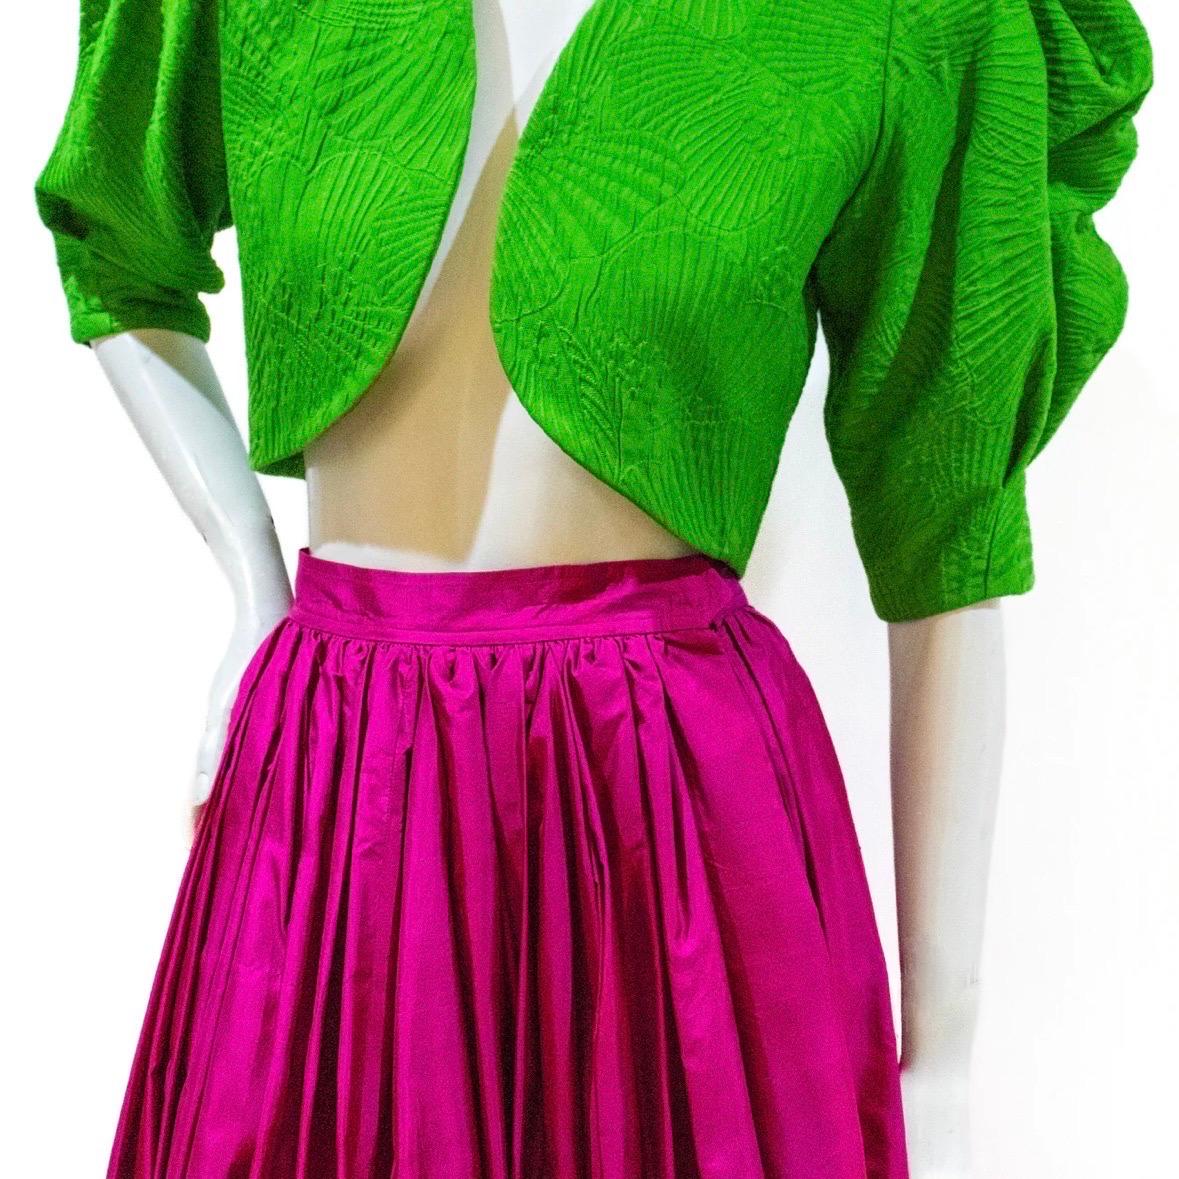 3-piece set with bolero jacket, full skirt, and sash by Yves Saint Laurent (Rive Gauche)

Top Details:
Spring 1975
Made in France
Solid kelly green
Textured floral pattern
Ruffled neck 
Leg of mutton sleeves
Curved hem
Cropped silhouette
Wool